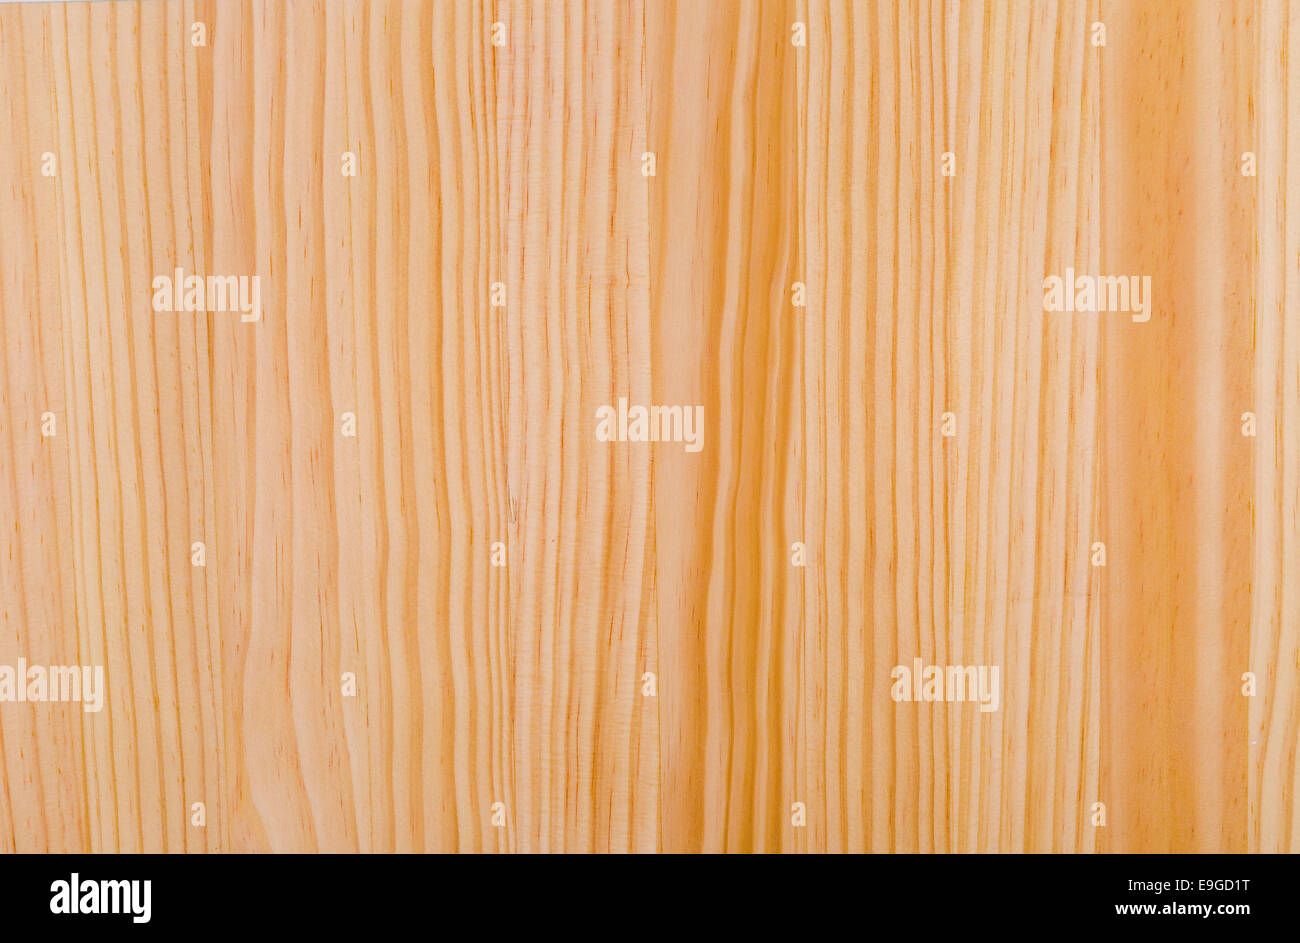 pine natural wood texture as a background Stock Photo